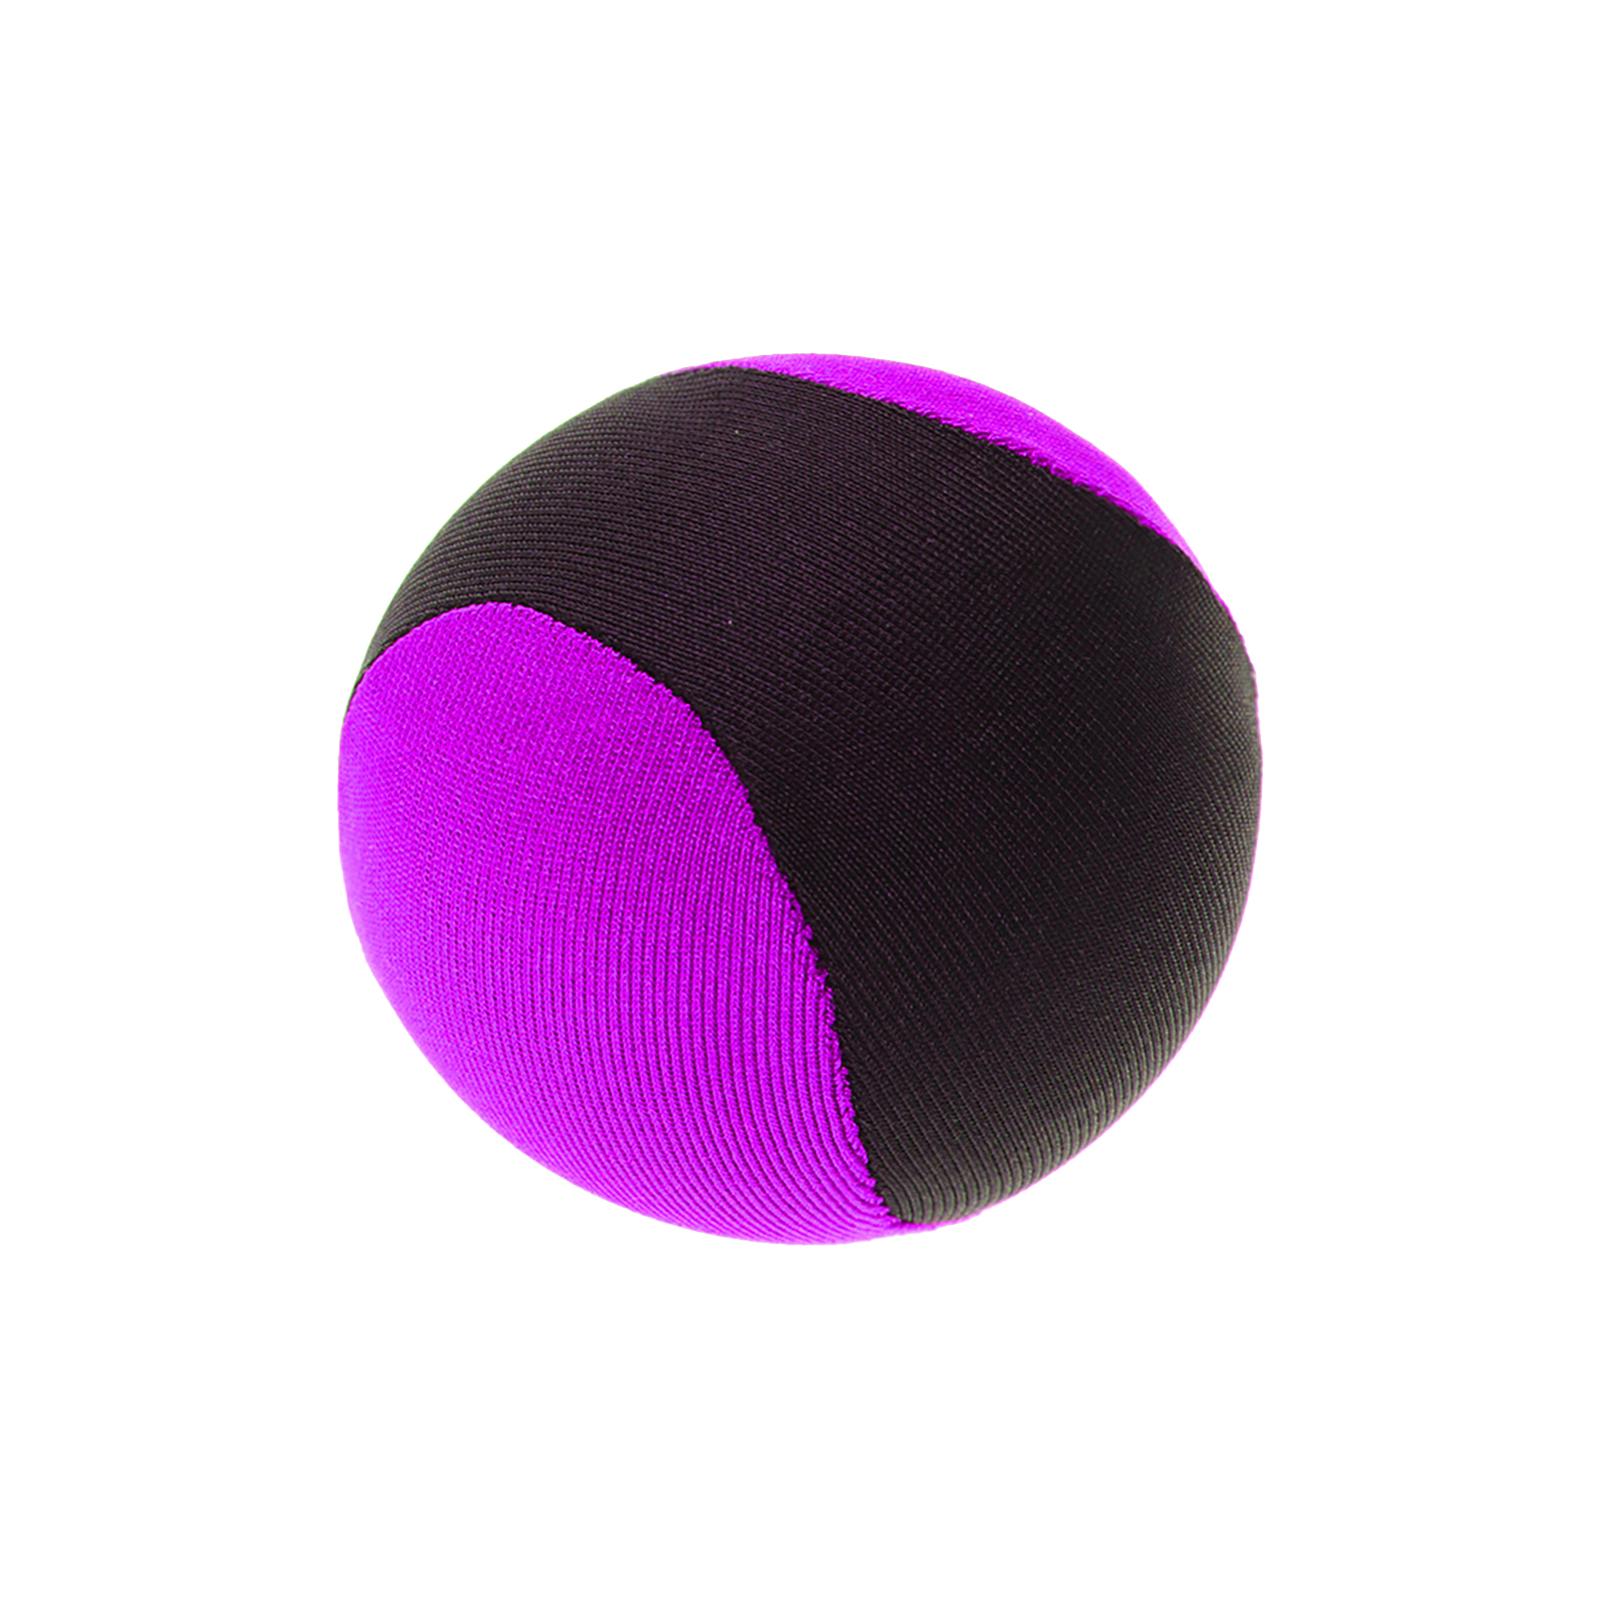 Bouncing Ball Sensory Toy Soft Relax Skipping Ball for Games Holiday Outdoor Purple 60mm